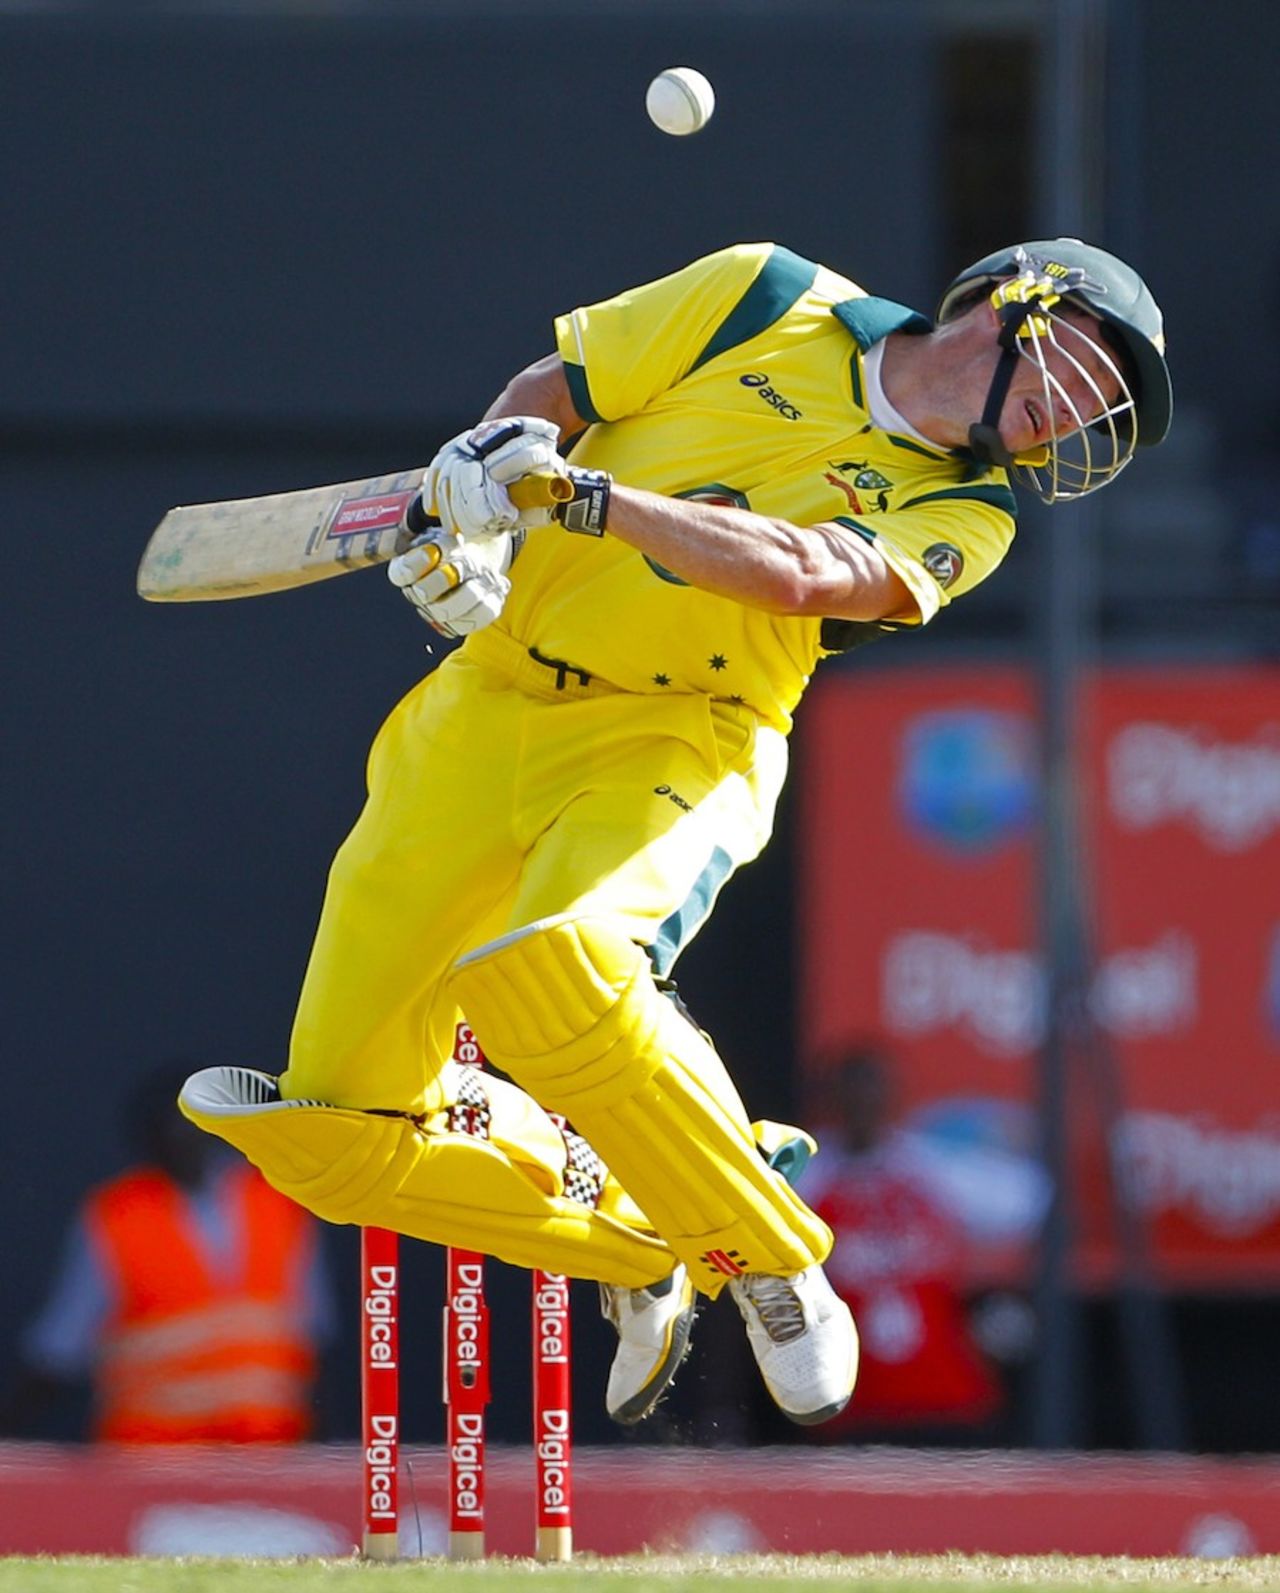 David Hussey avoids a short ball, West Indies v Australia, 4th ODI, Gros Islet, March 23, 2012